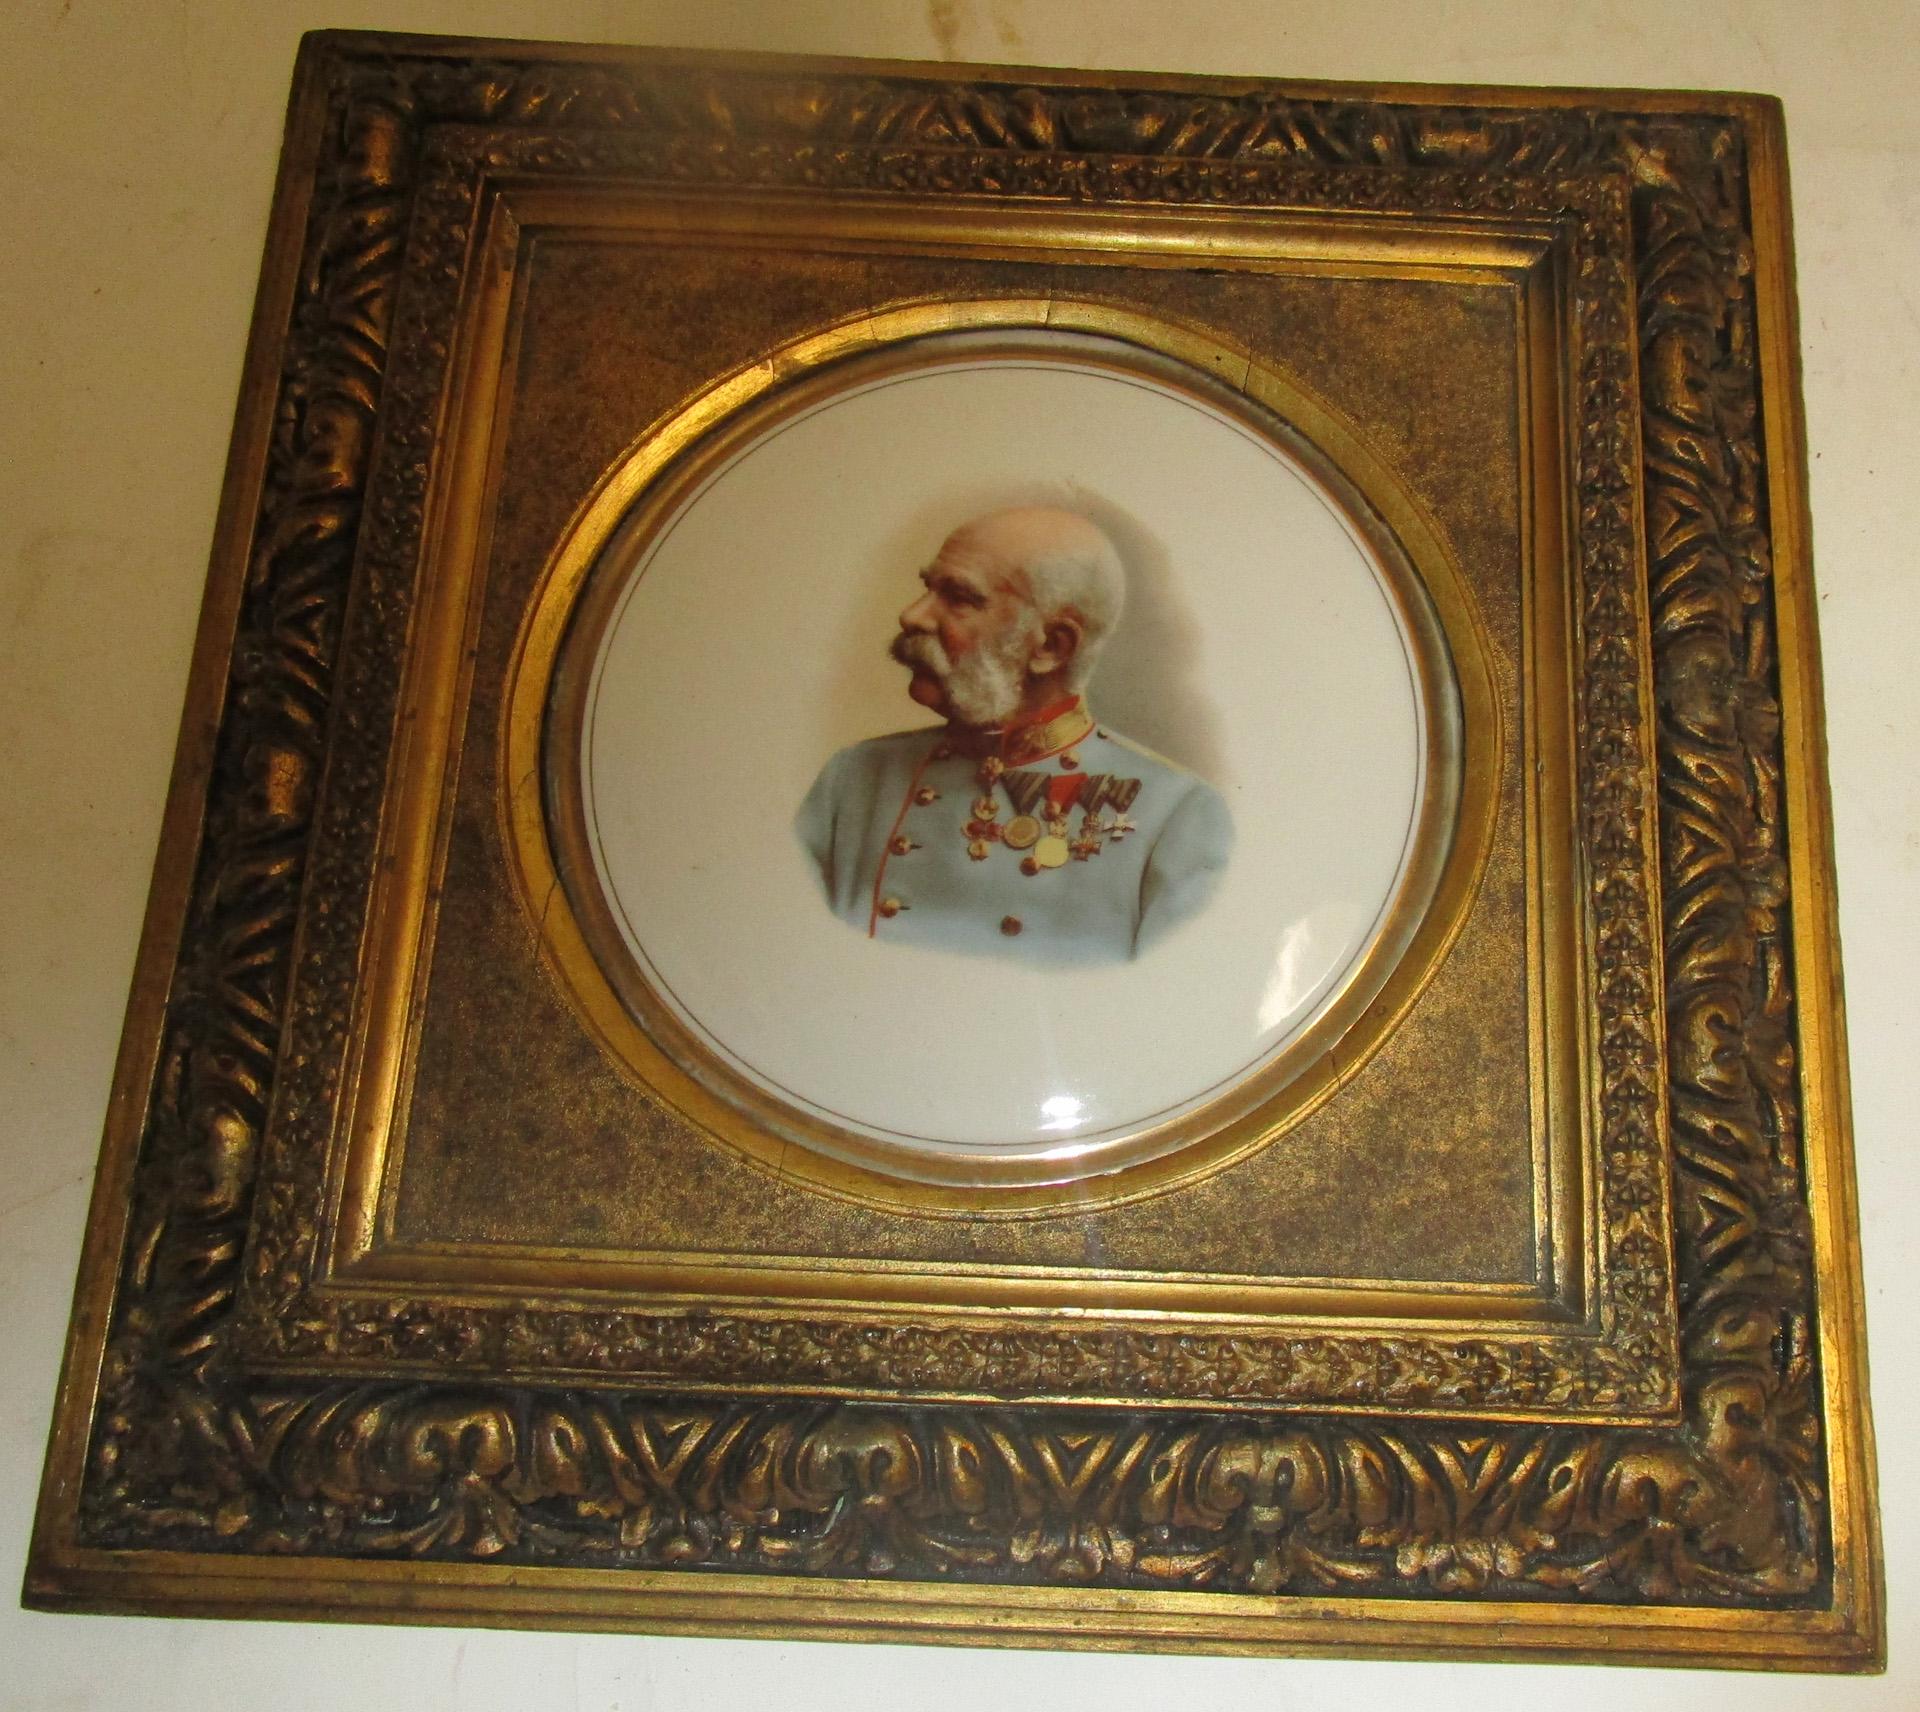 This detailed KPM porcelain plaque features a painting of Franz Joseph and is beautifully accentuated by a wide ornate antique giltwood frame. The porcelain circle measures seven and three quarter inches. Original frame. Unsigned.
